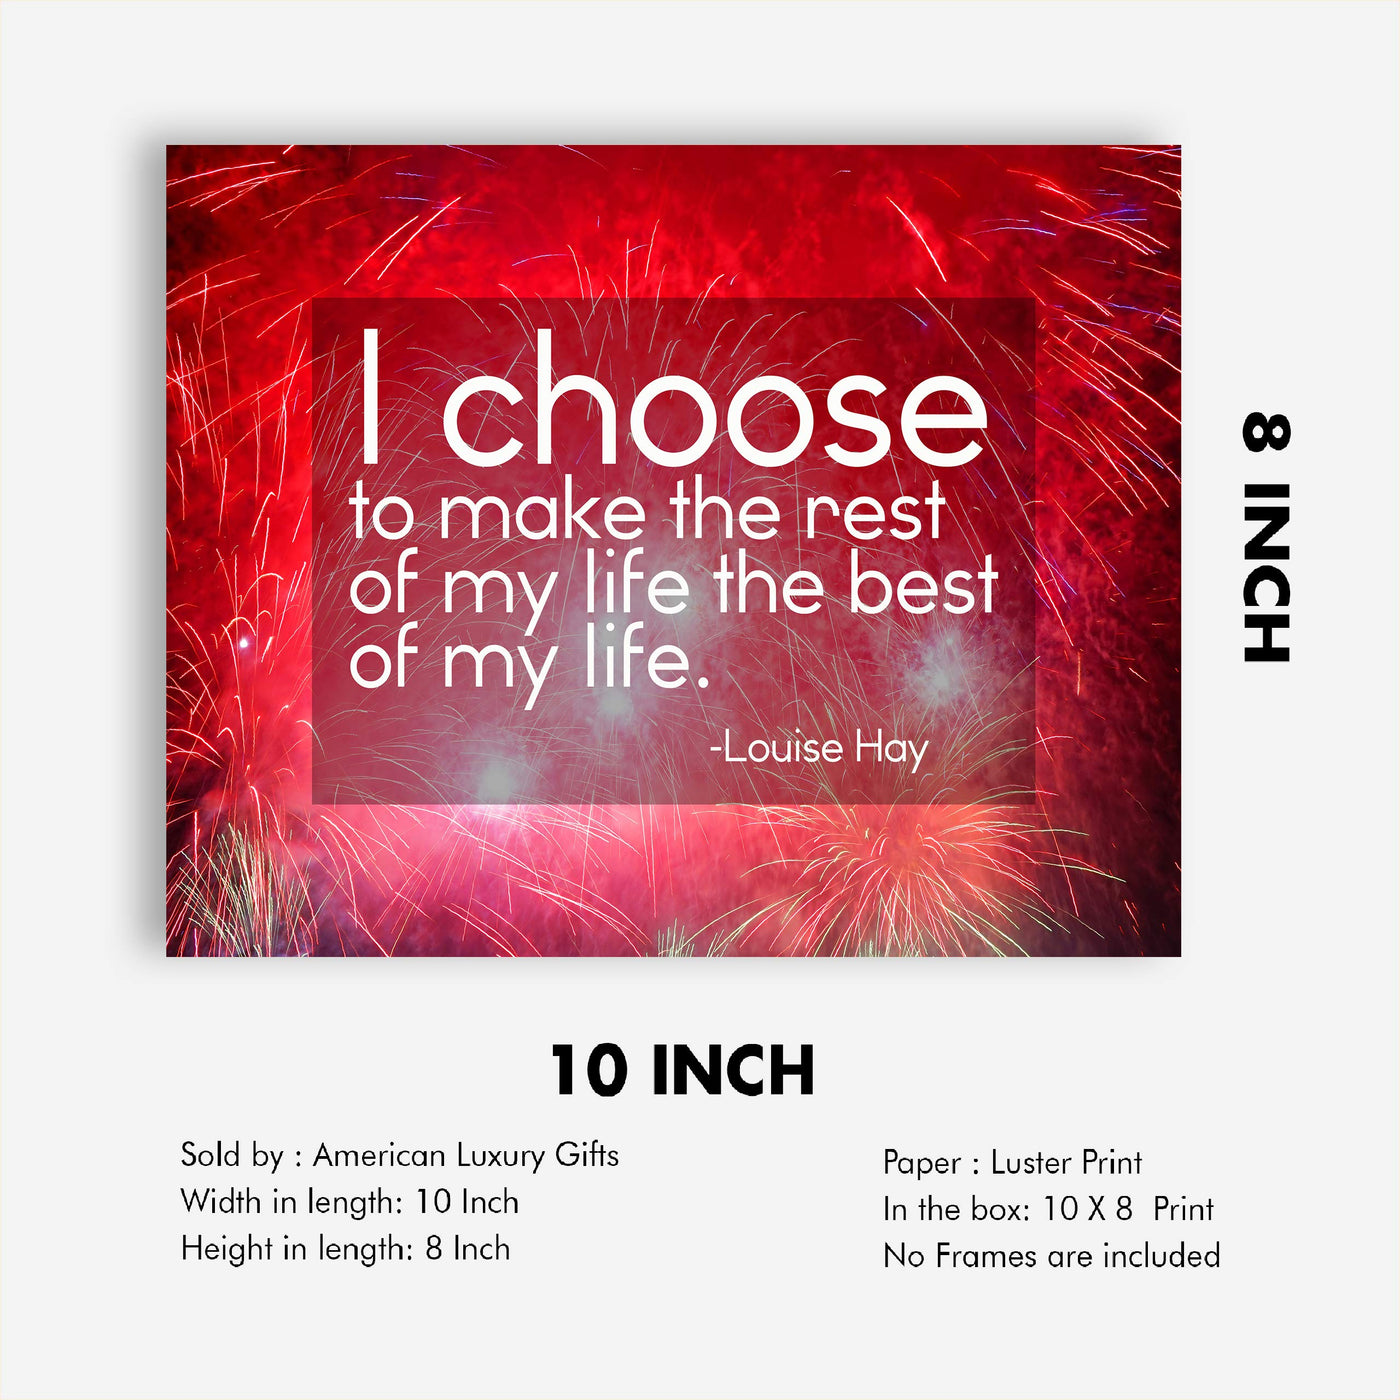 Choose to Make the Rest of My Life the Best of My Life-Louise Hay Quotes Wall Sign -10 x 8" Inspirational Art Print-Ready to Frame. Positive Home-Office-Studio-Dorm Decor. Great Motivational Gift!